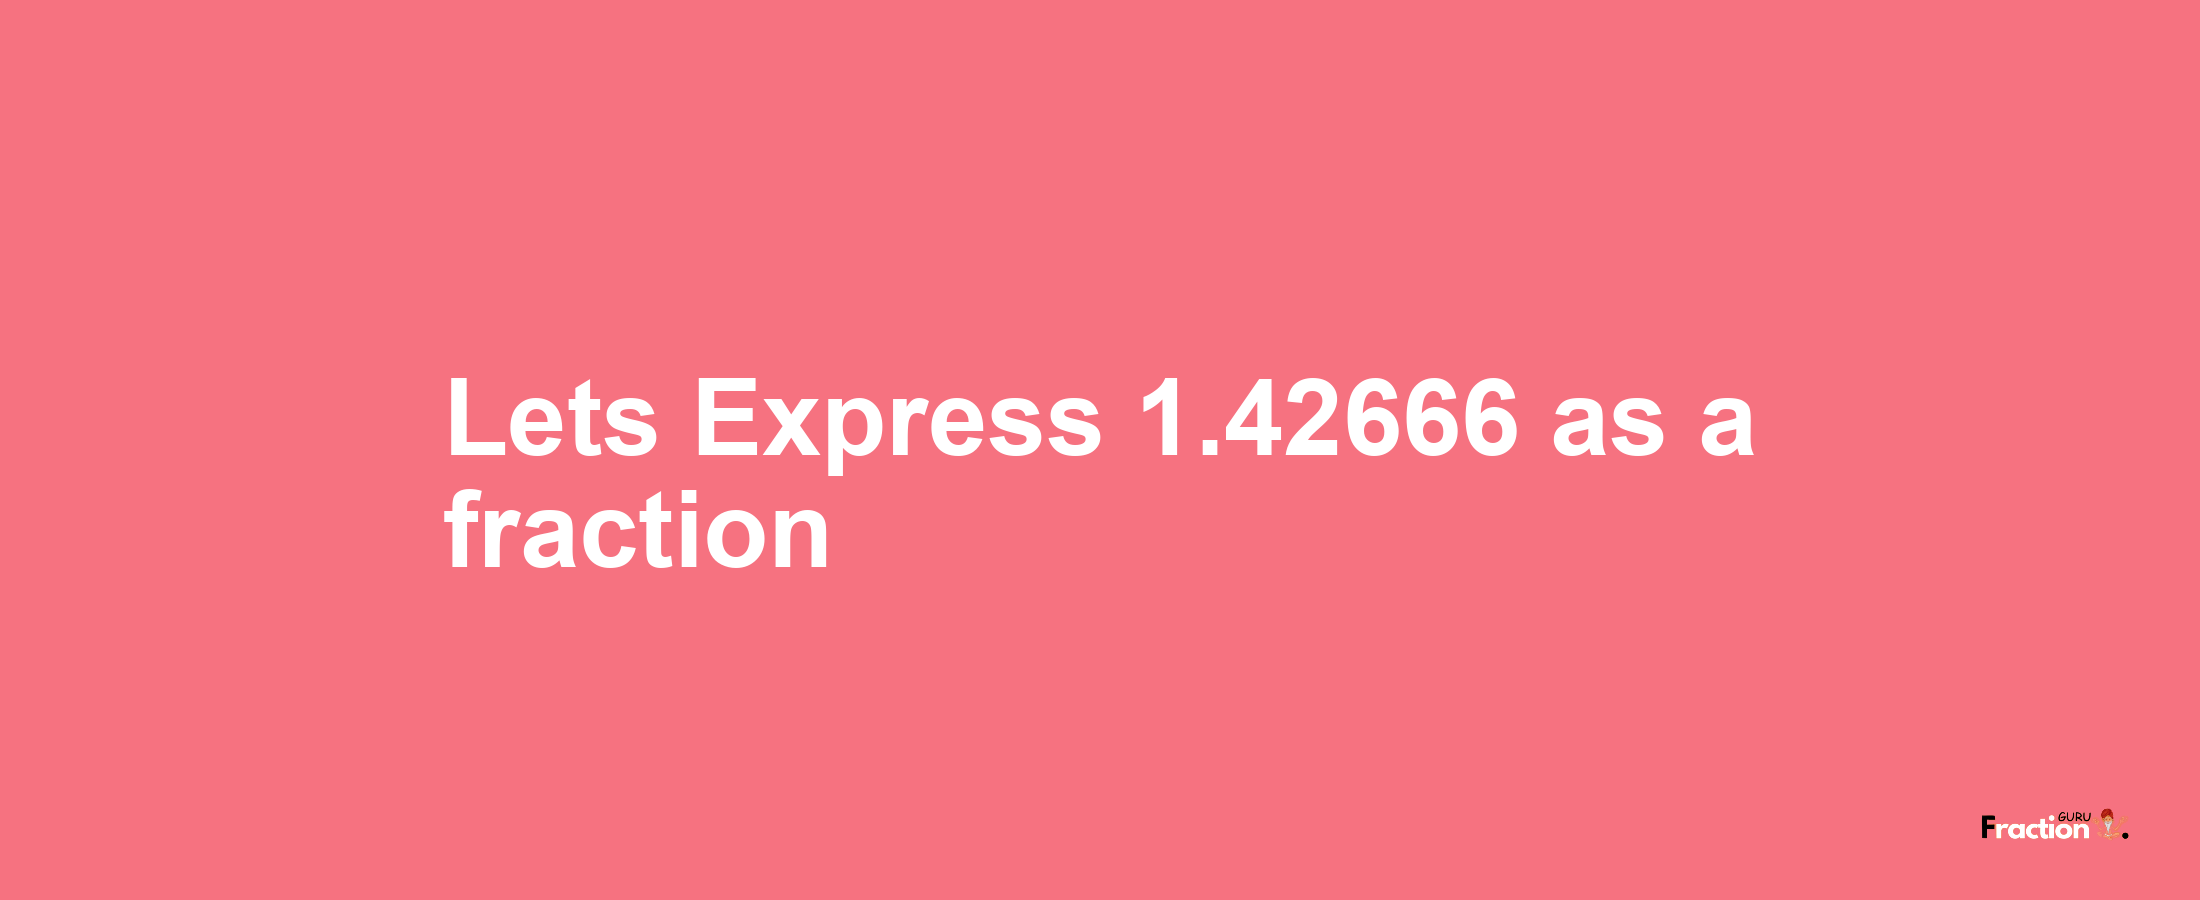 Lets Express 1.42666 as afraction